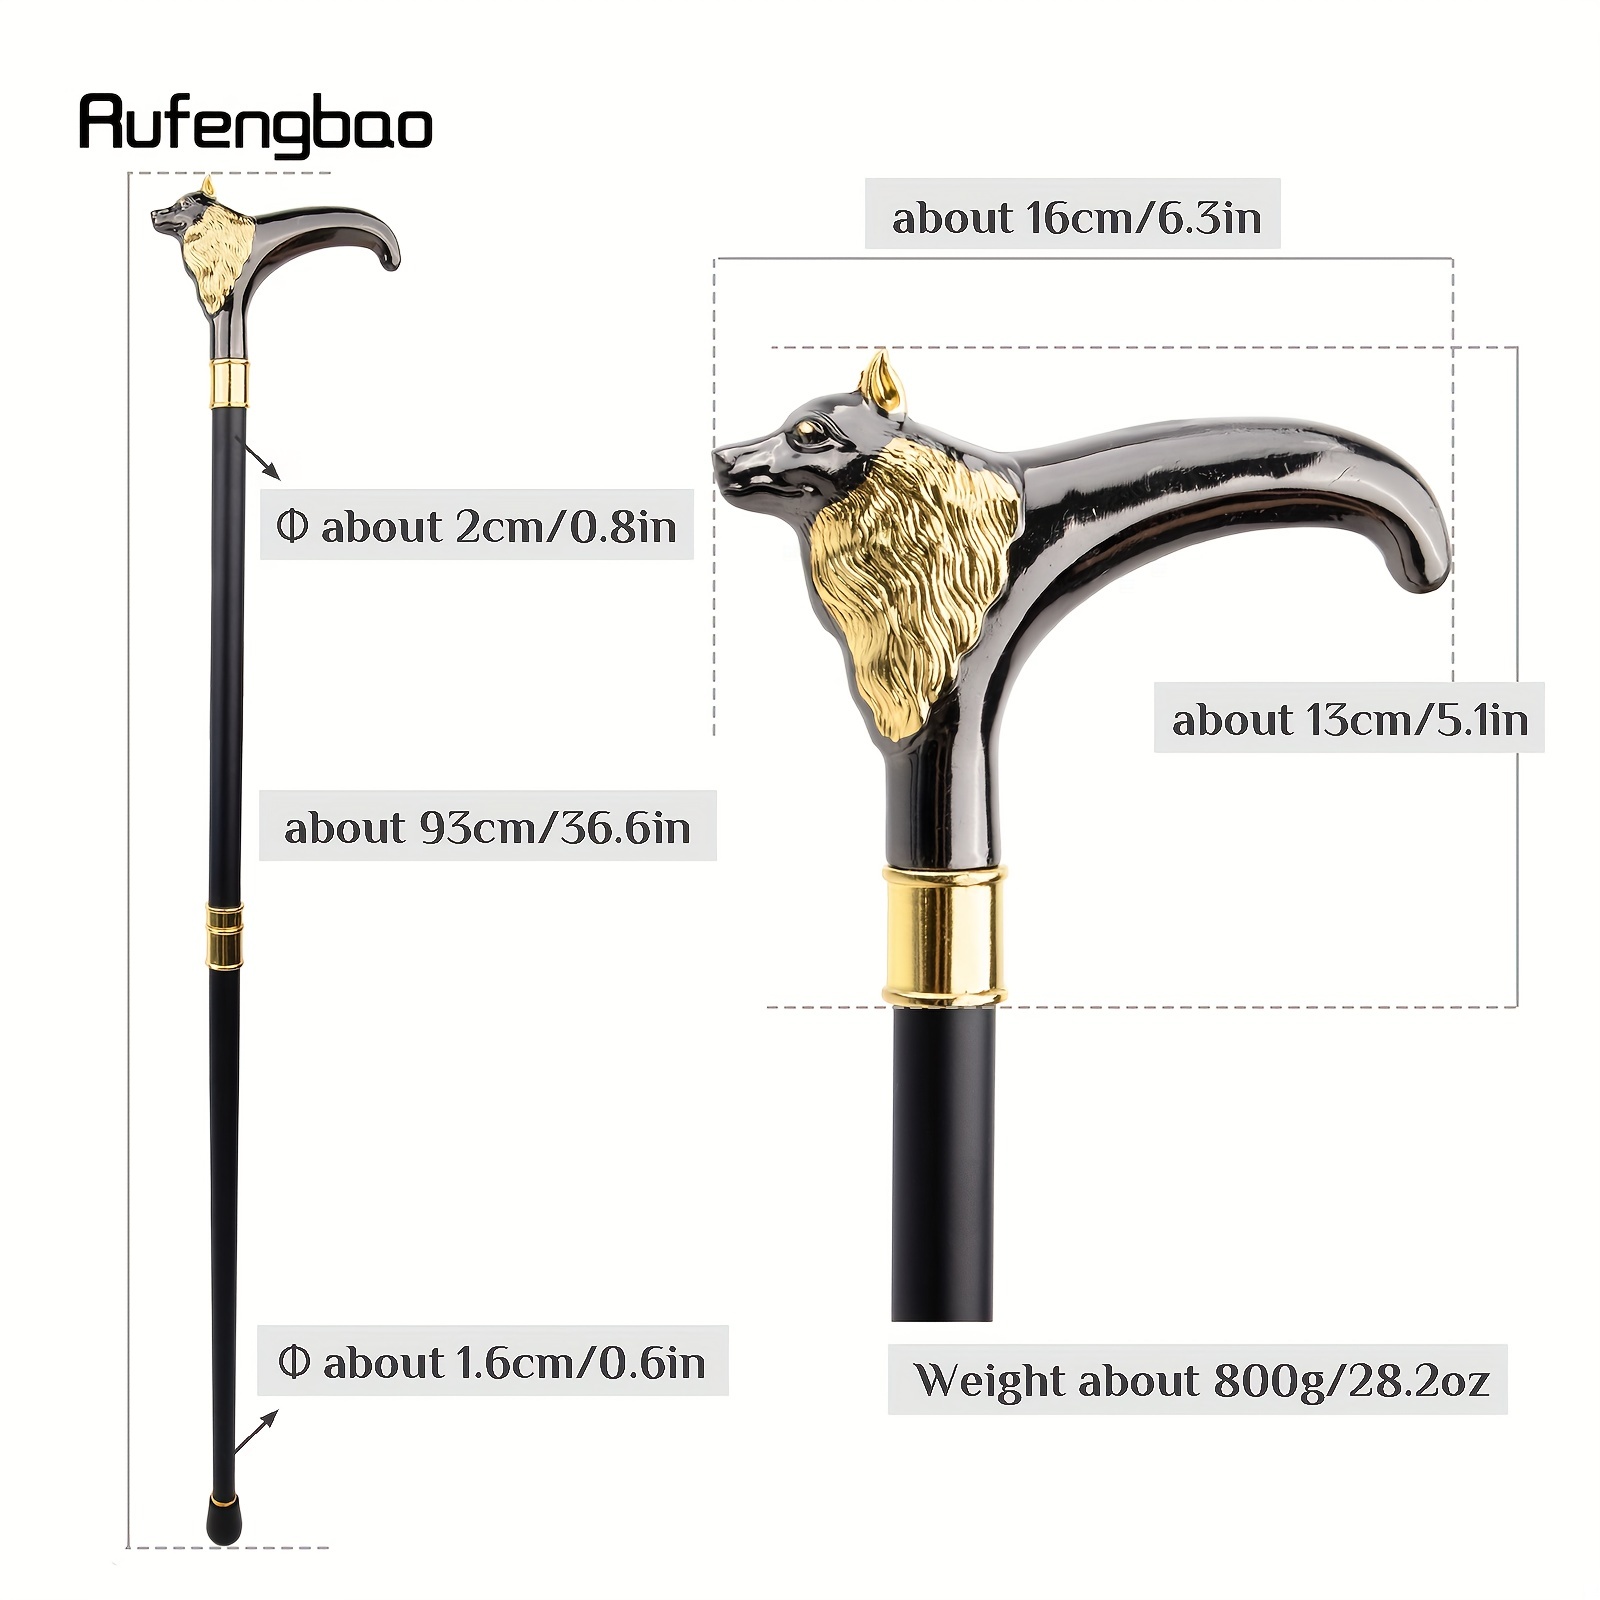 Leopard Brown Wooden Walking Cane: Fashionable, Vampire Themed Halloween  Party Accessory From Rufengbao, $17